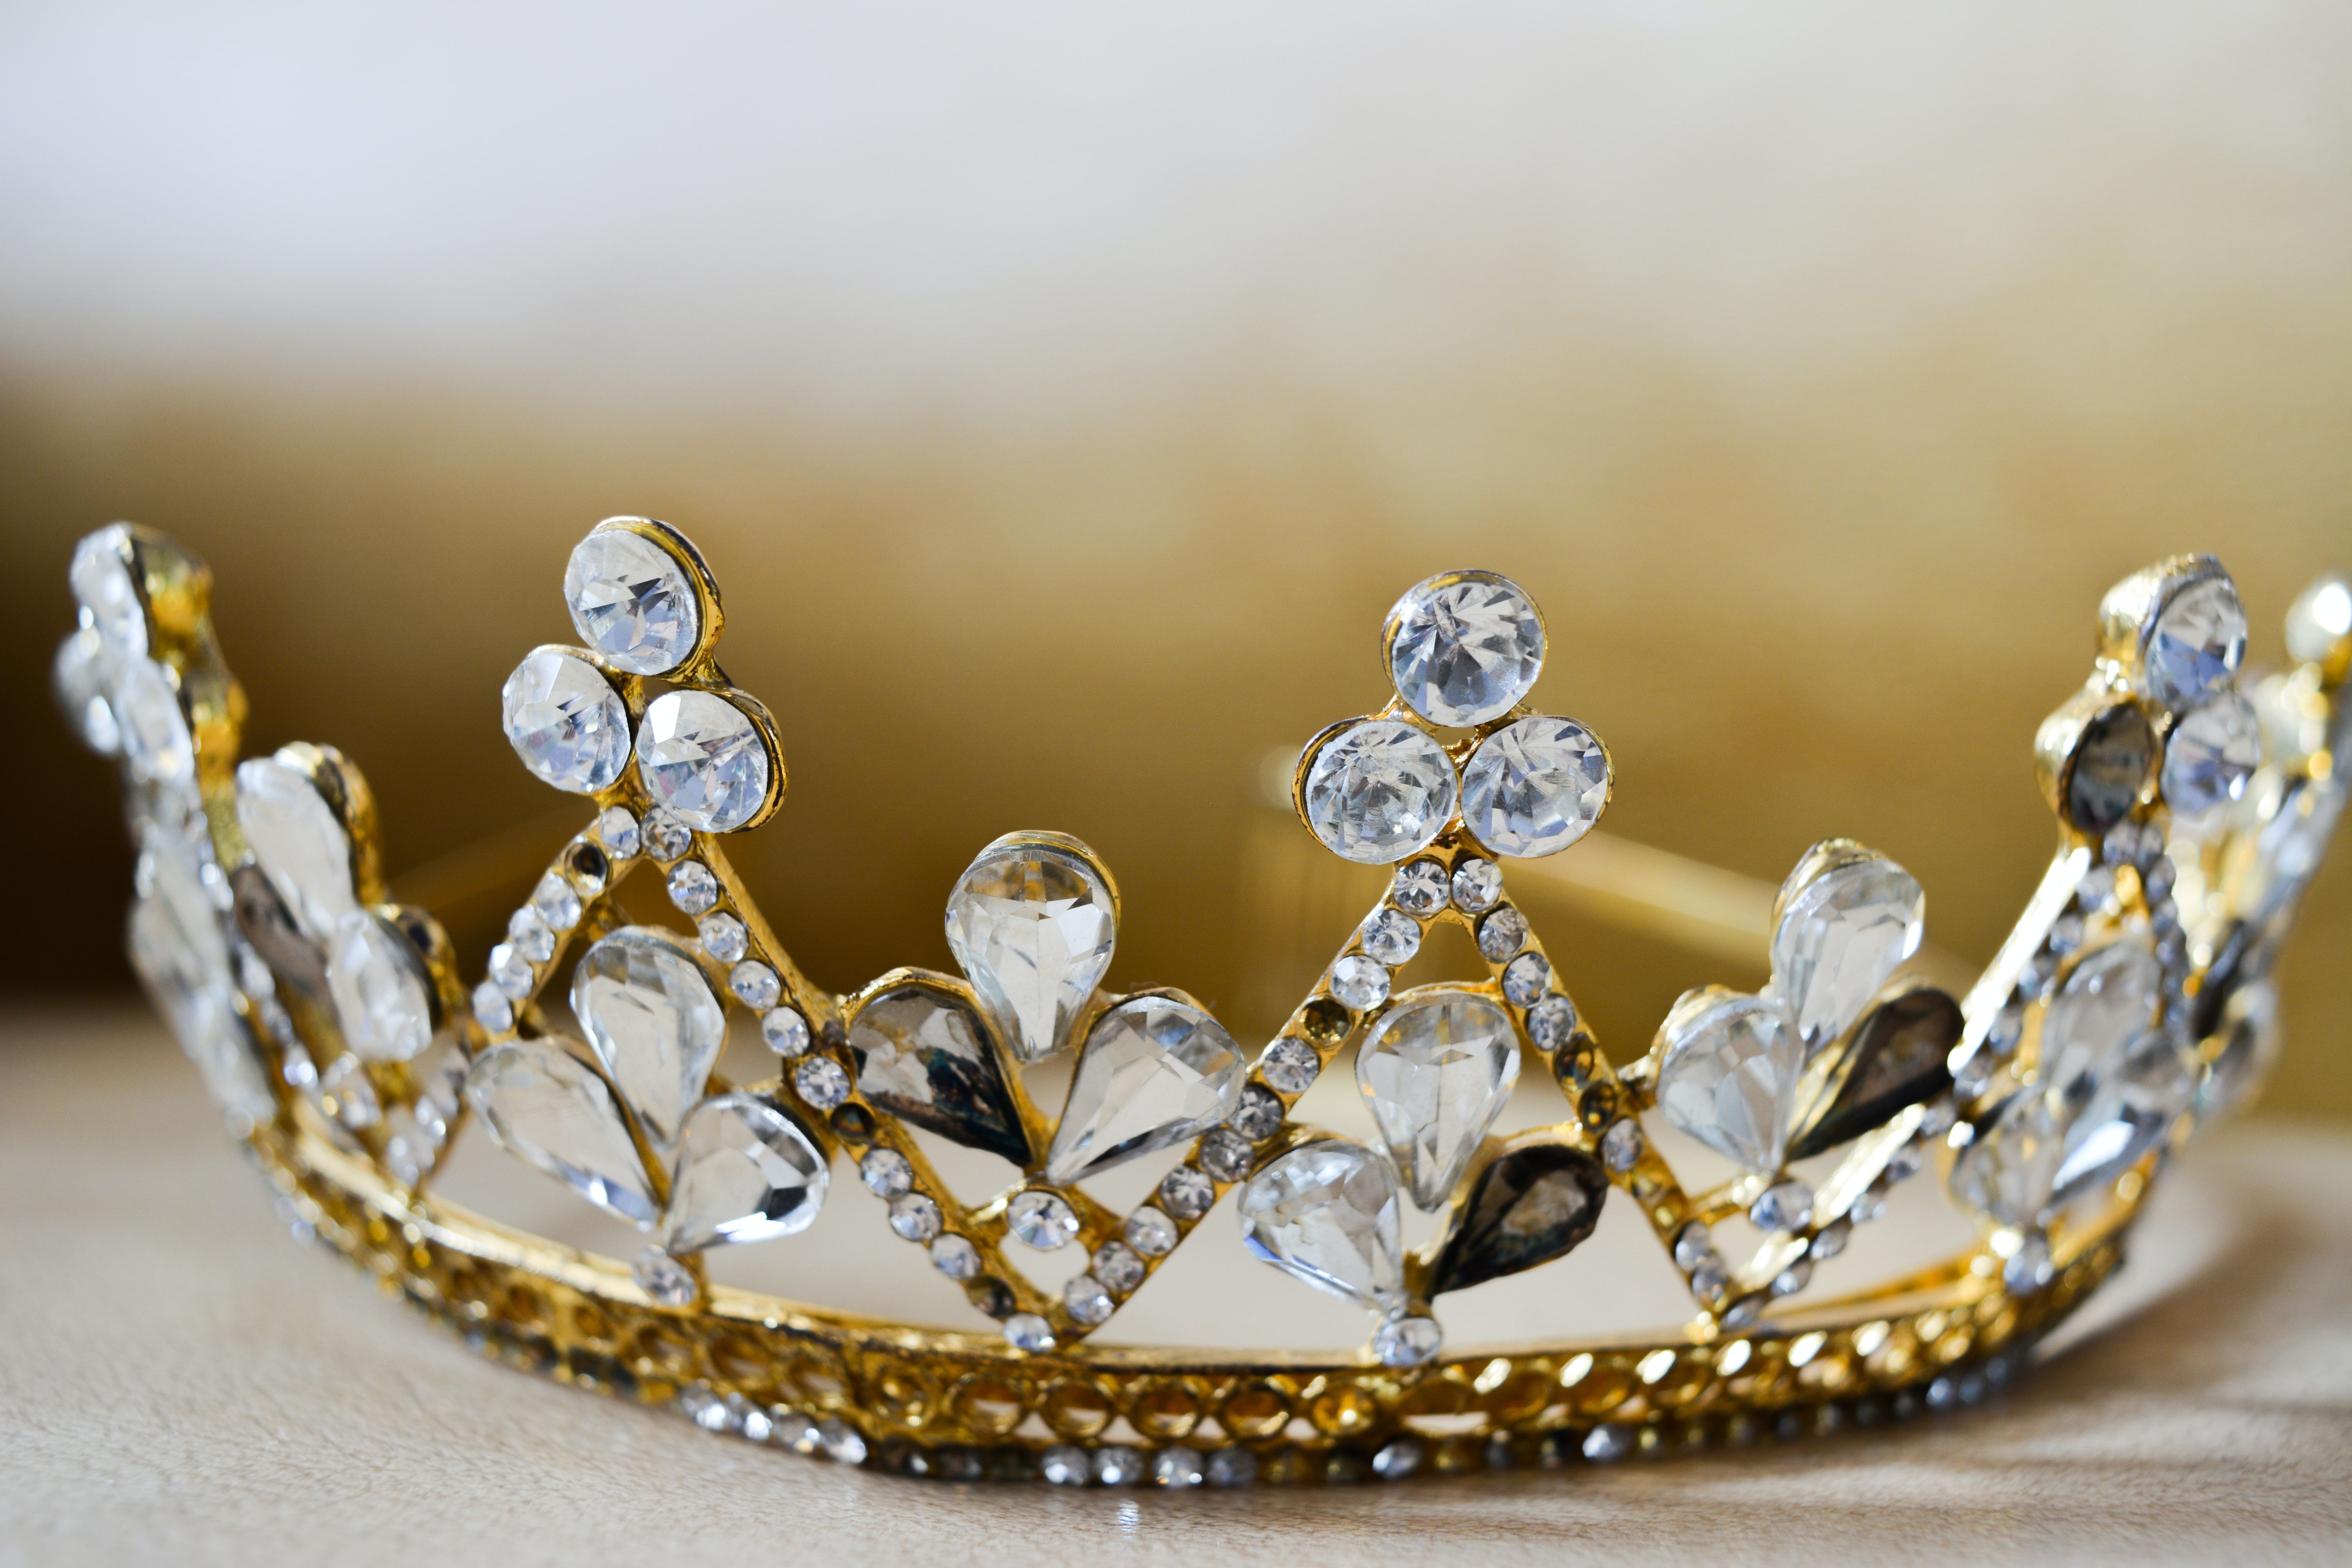 A crown made of gold and diamonds - Royalcore, crown